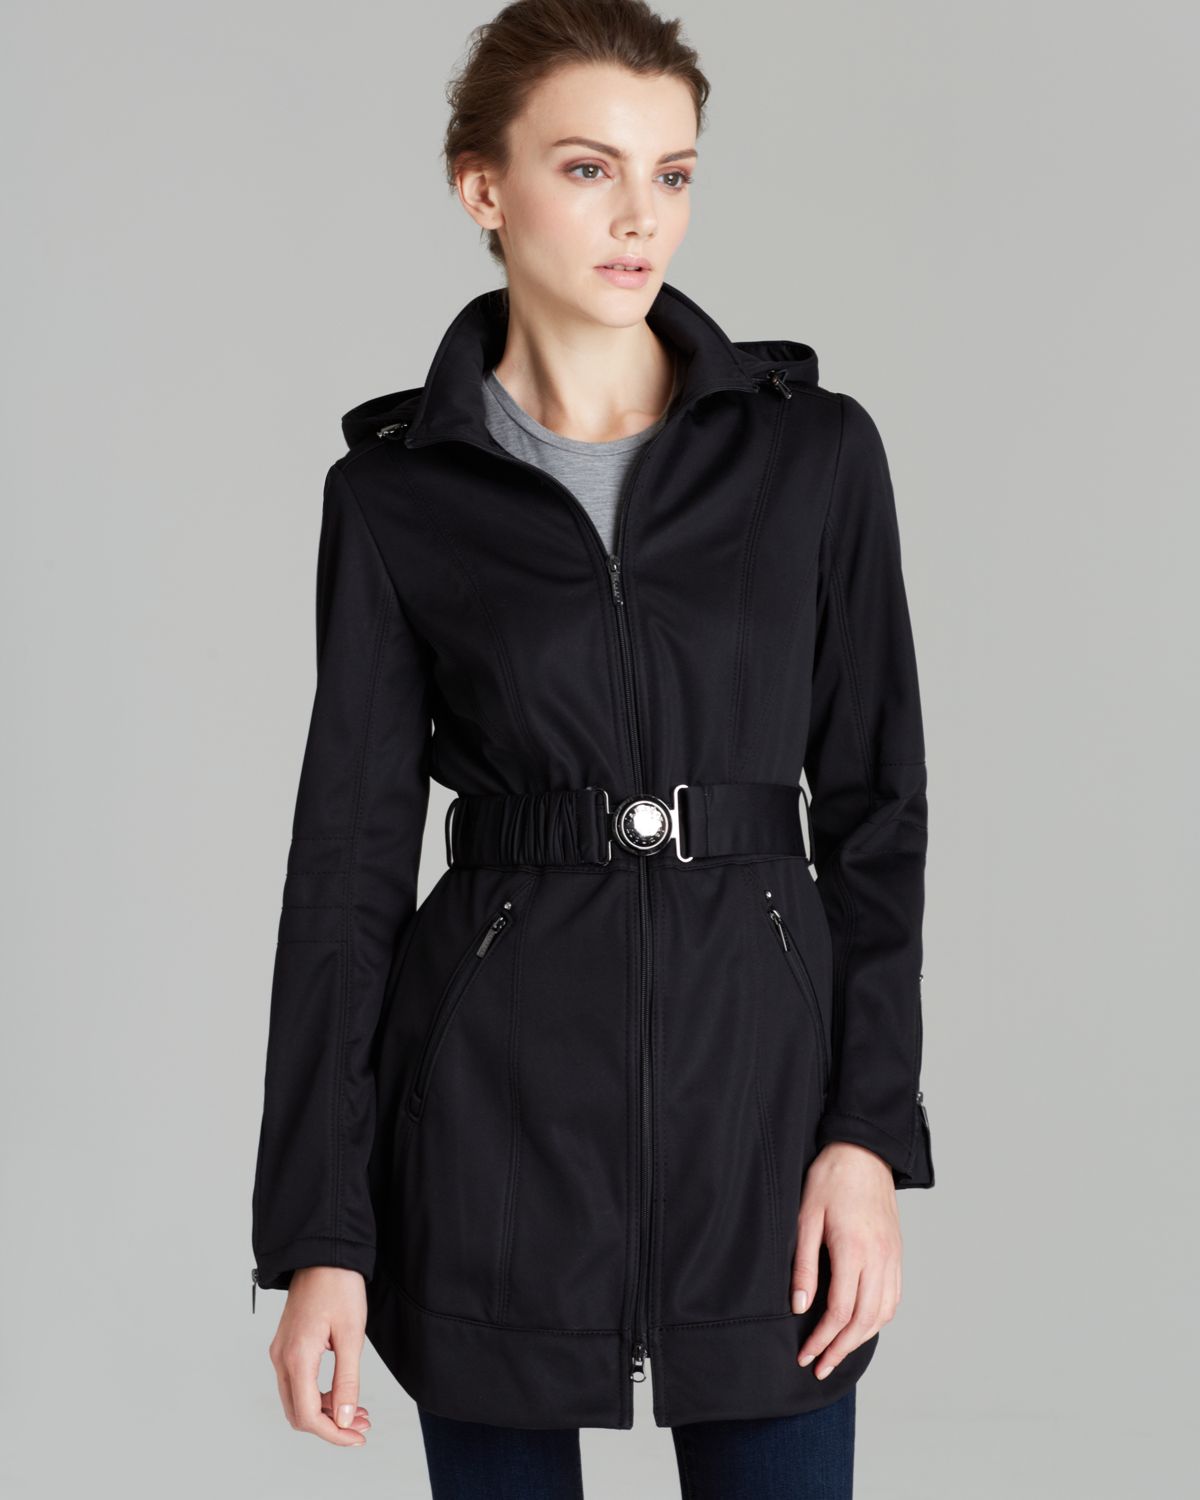 Laundry by shelli segal Belted Hooded Soft Shell Coat in Black | Lyst